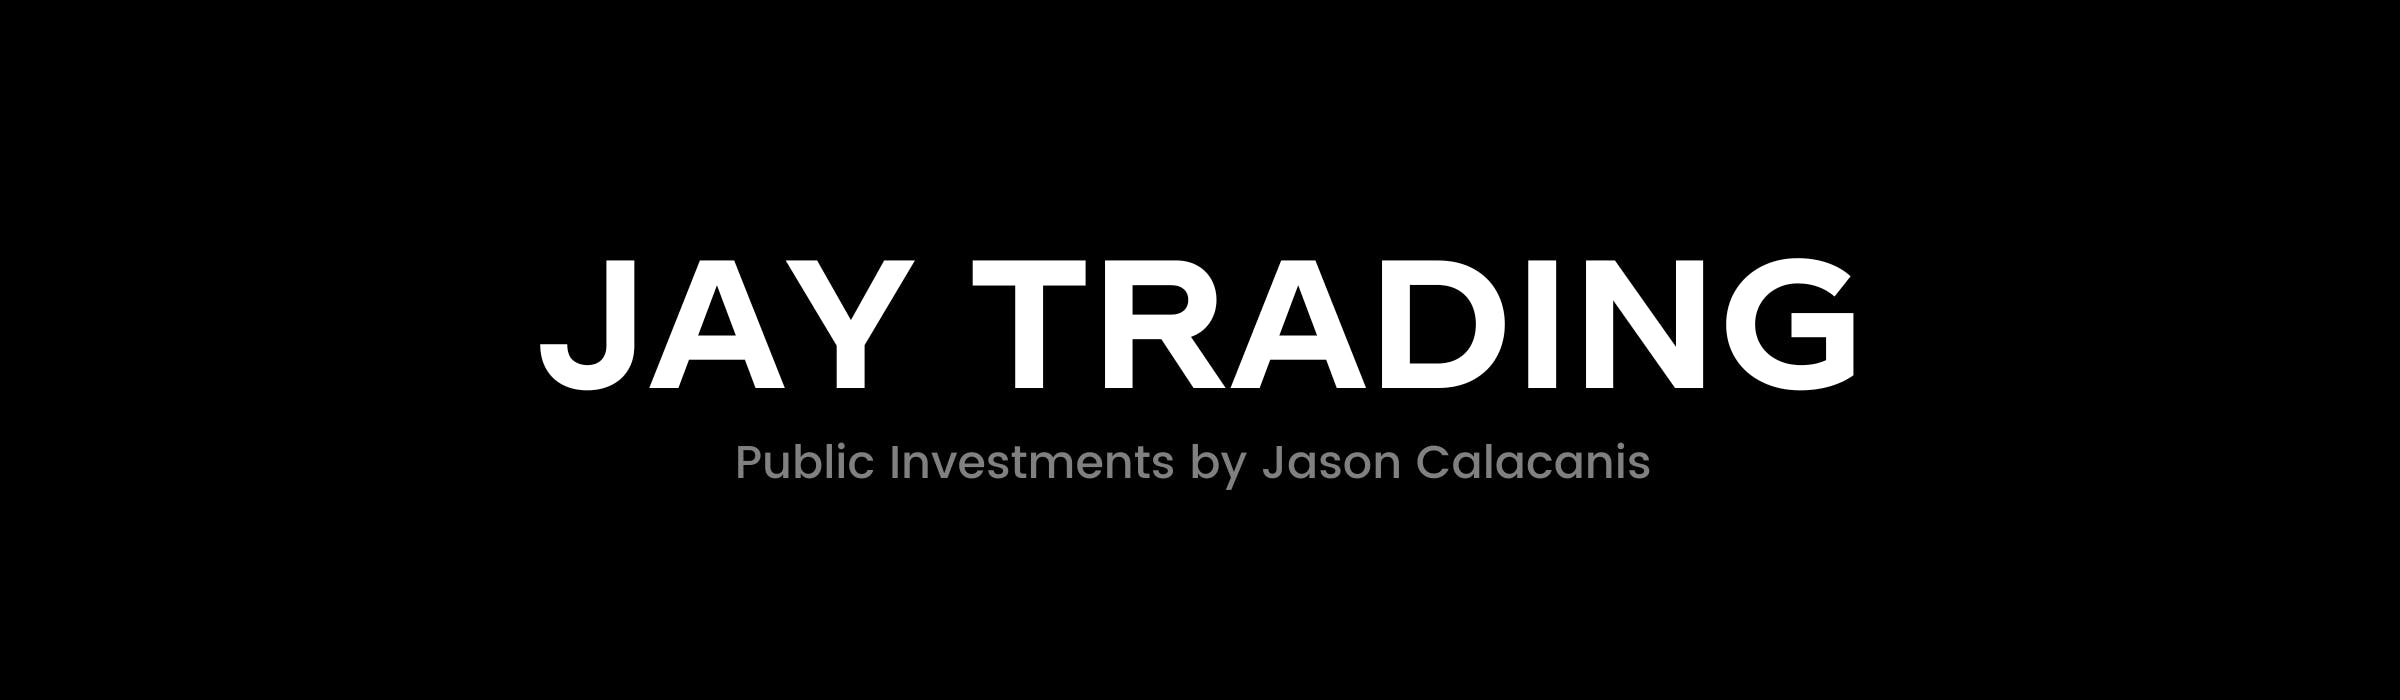 JAY TRADING (3).png